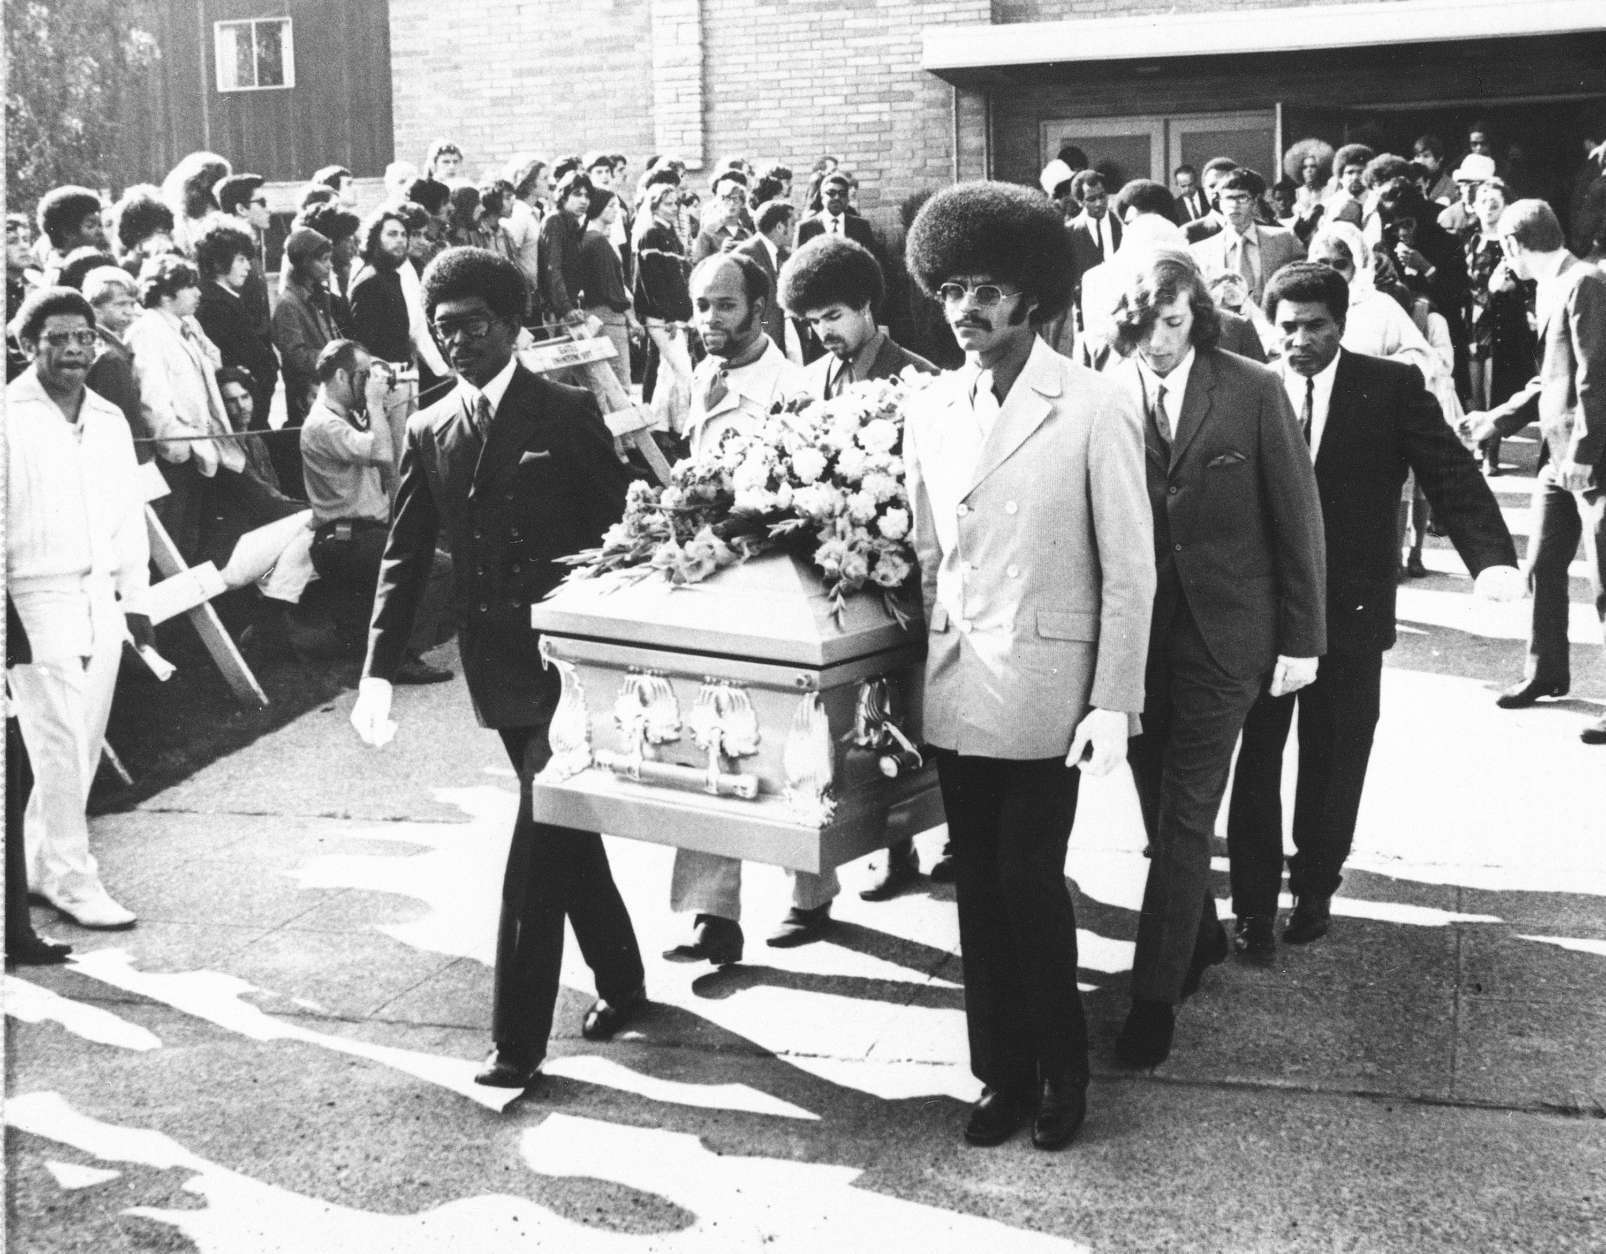 Friends of the late rock star Jimi Hendrix carry his coffin from the church after funeral services, Oct. 1, 1970 in Seattle.  Pallbearers include Herbert Price, left, Hendrix' valet; Donny Howell behind Price; and Eddie Rye, front right.  Others are unidentified.  (AP Photo/Barry Sweet)